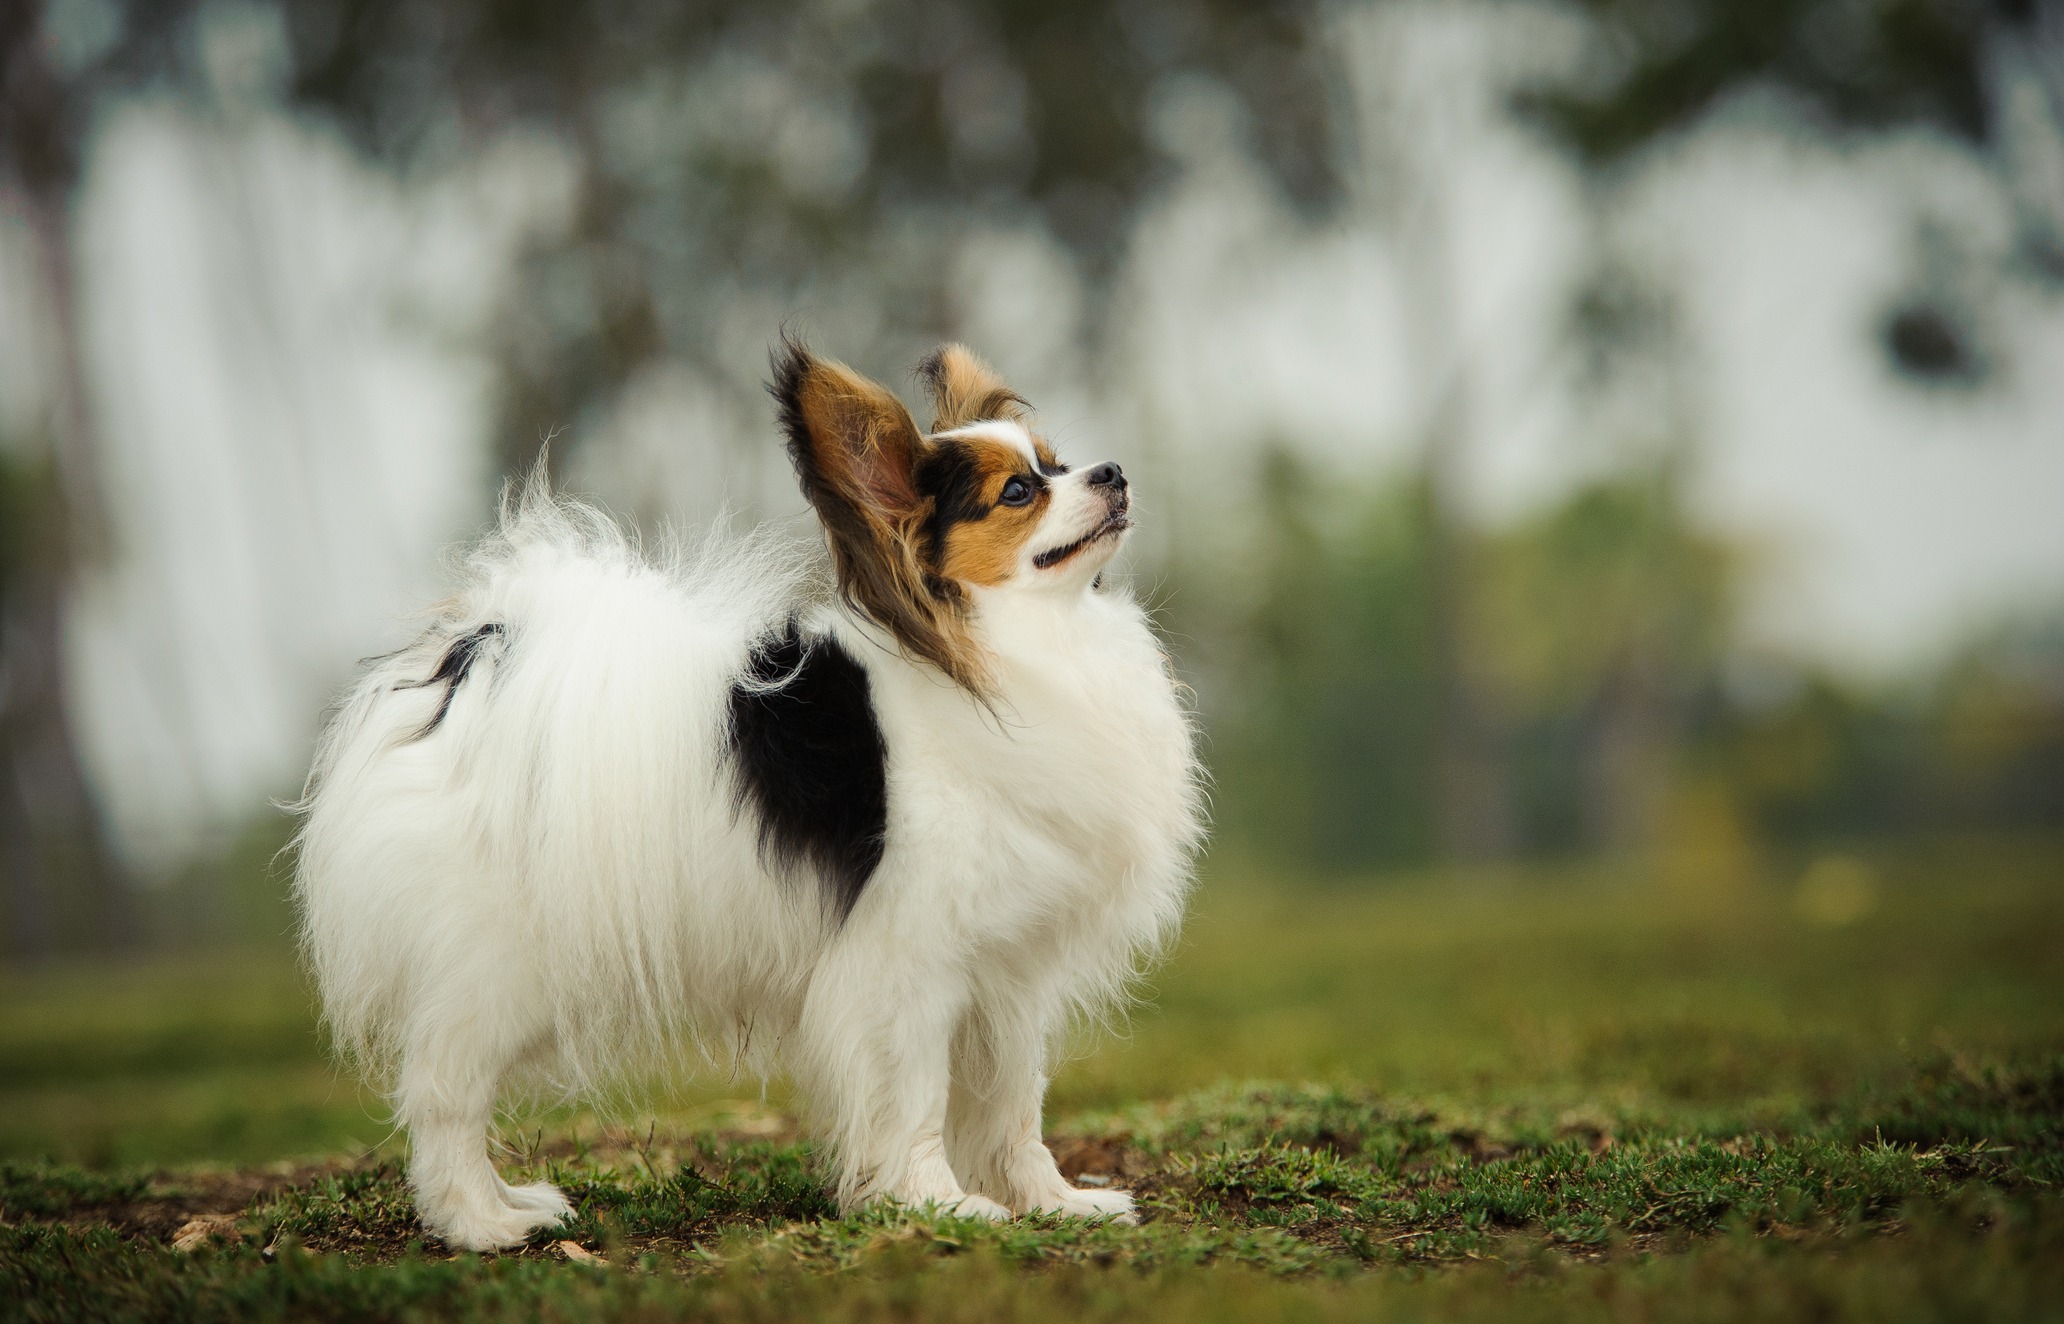 The 10 Smartest Dogs Breeds Are Some of the Most Popular